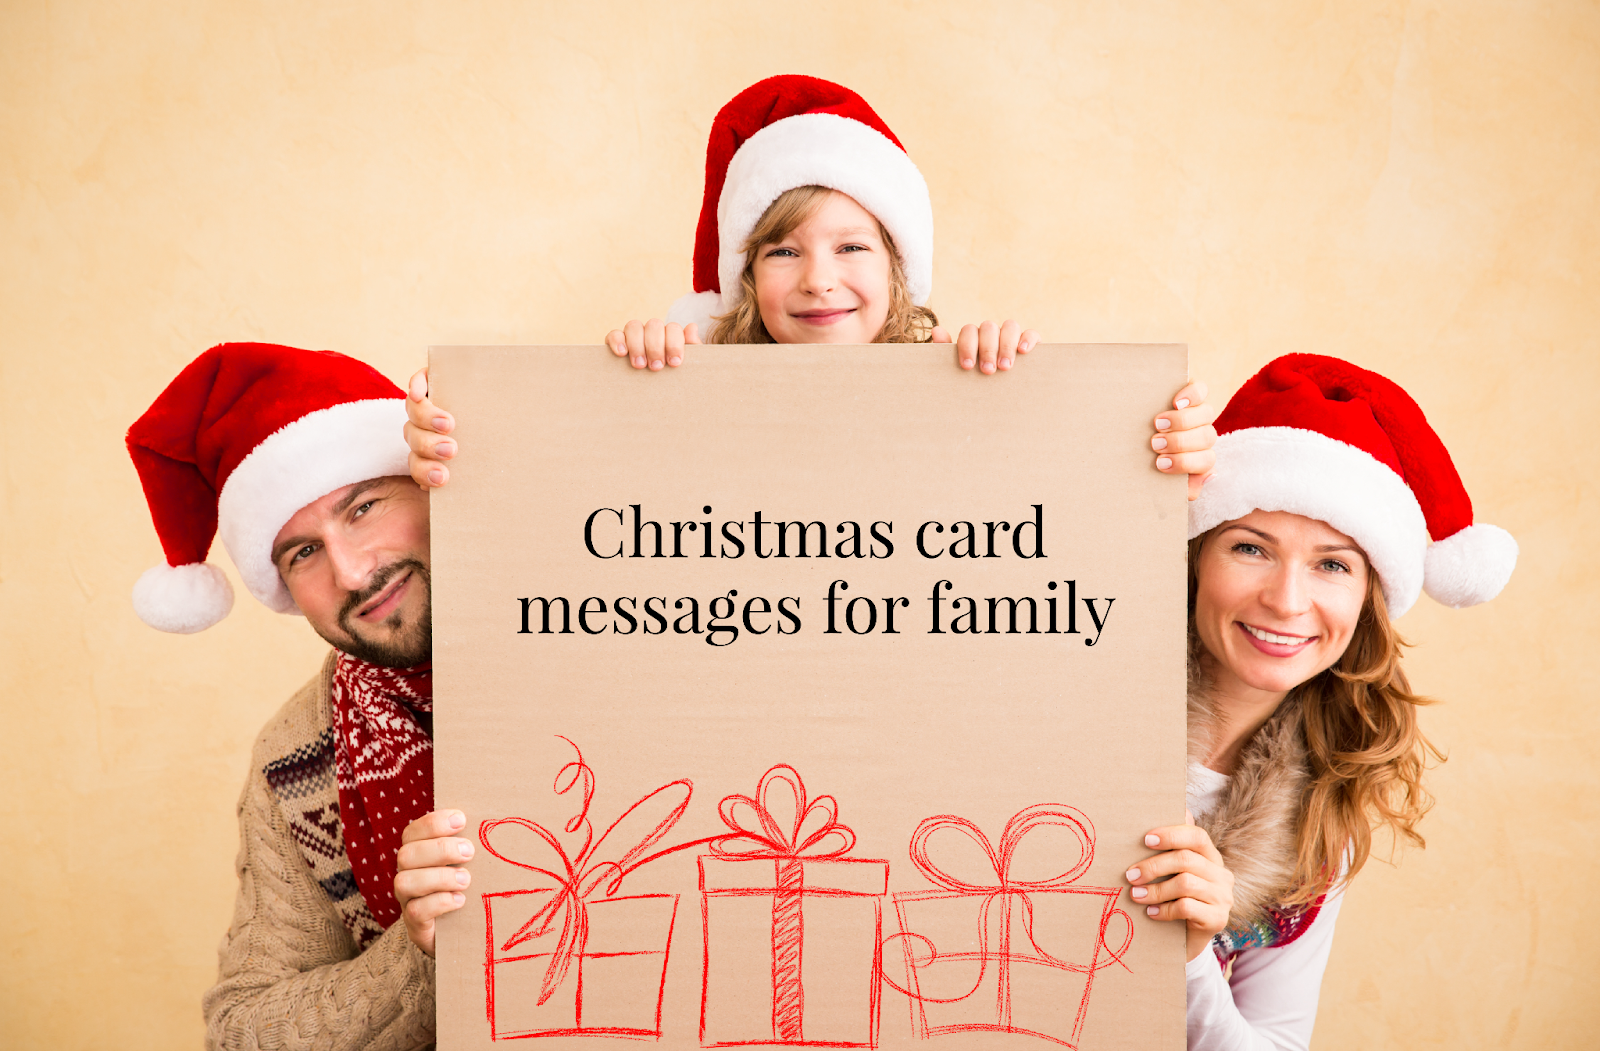 A family of three holding a sign that says “Christmas card messages for family”